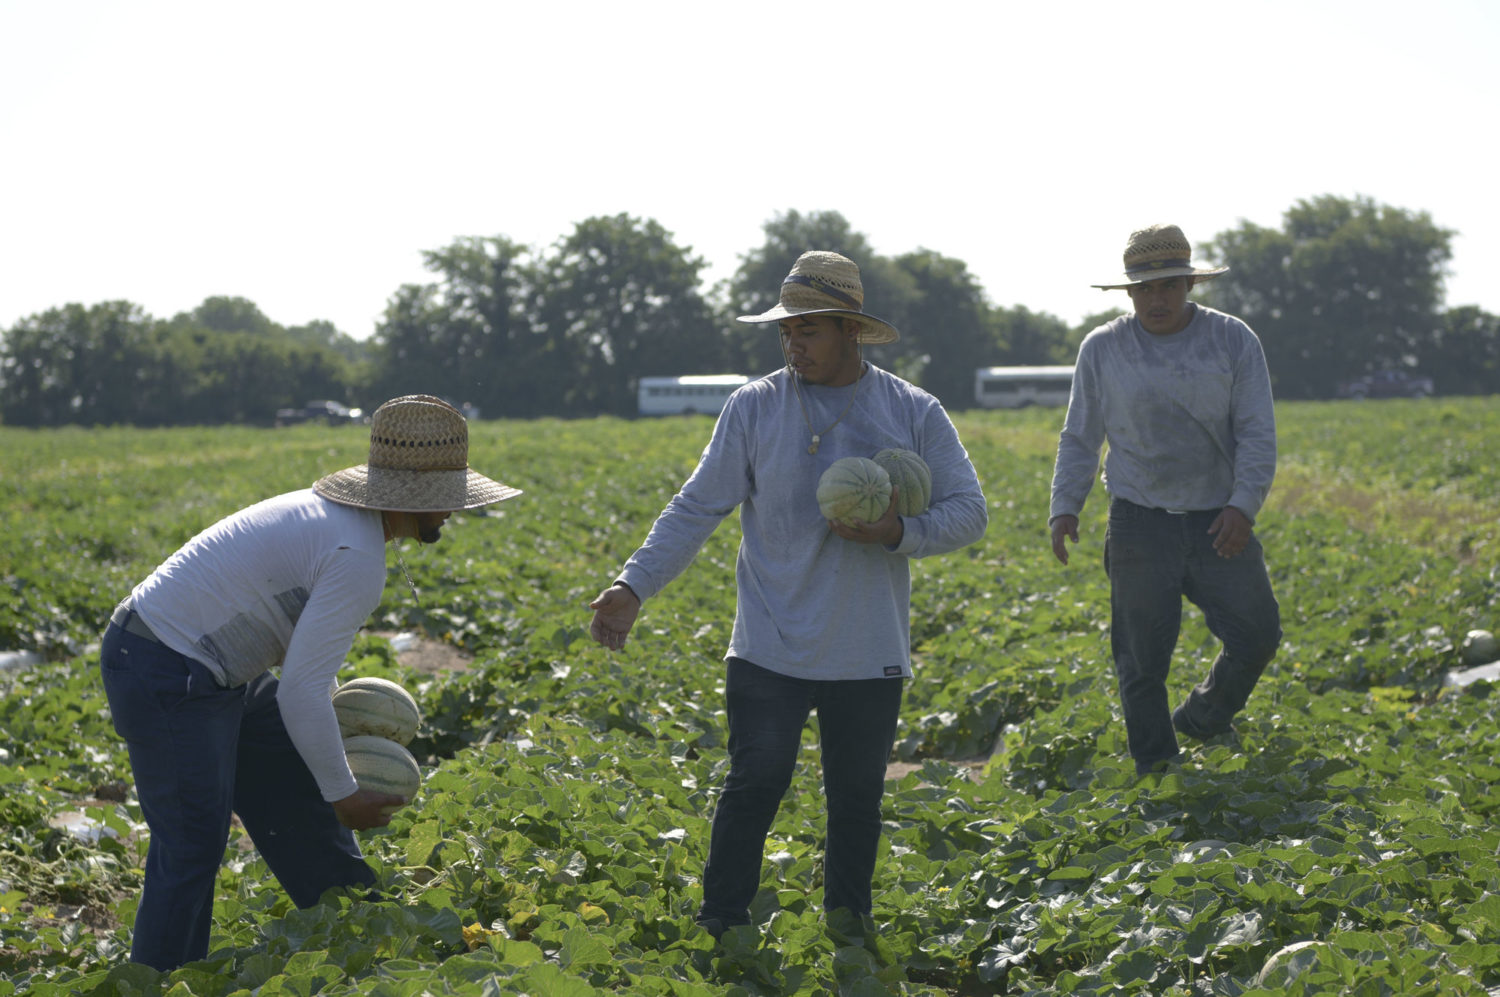 A Crew of migrant farm workers picks cantaloupe on Thursday, July 4, 2019 north of Kennett, Missouri. August 2020